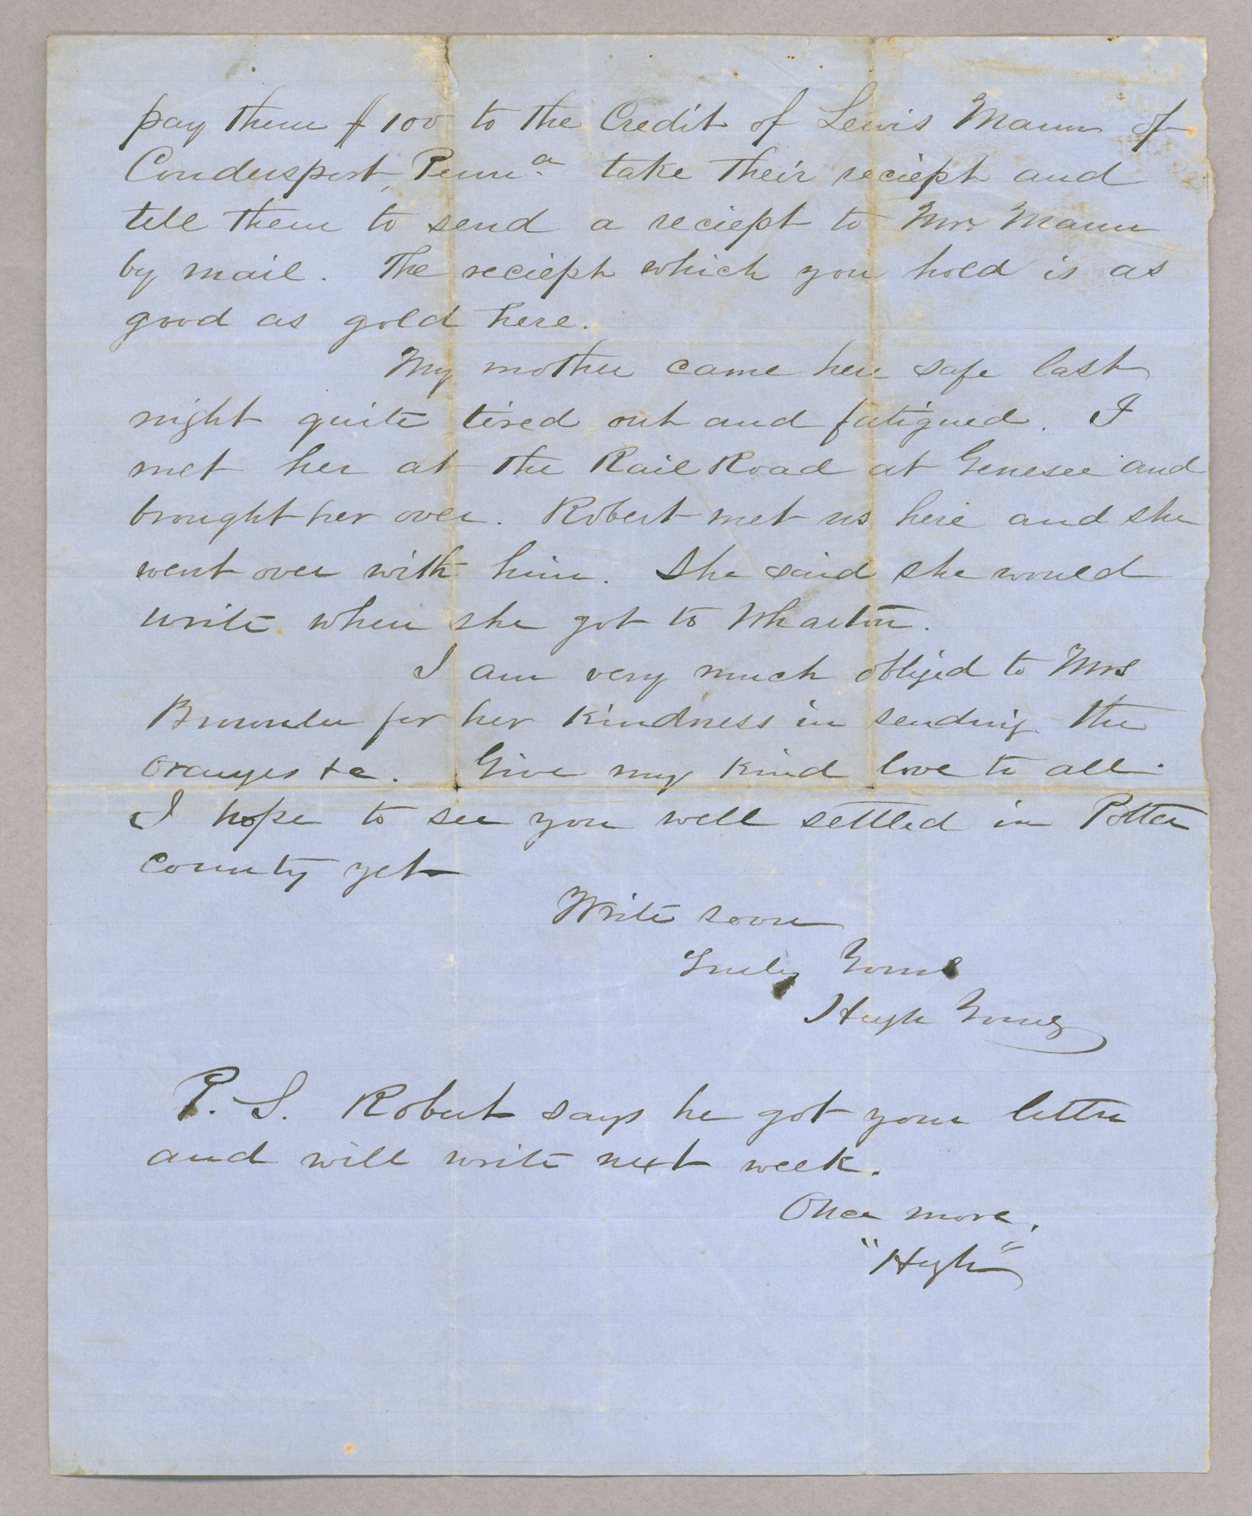 Letter. Hugh Young, Coudersport, Pennsylvania, to "Dear John" [John E. Brownlee], n. p., Page 2